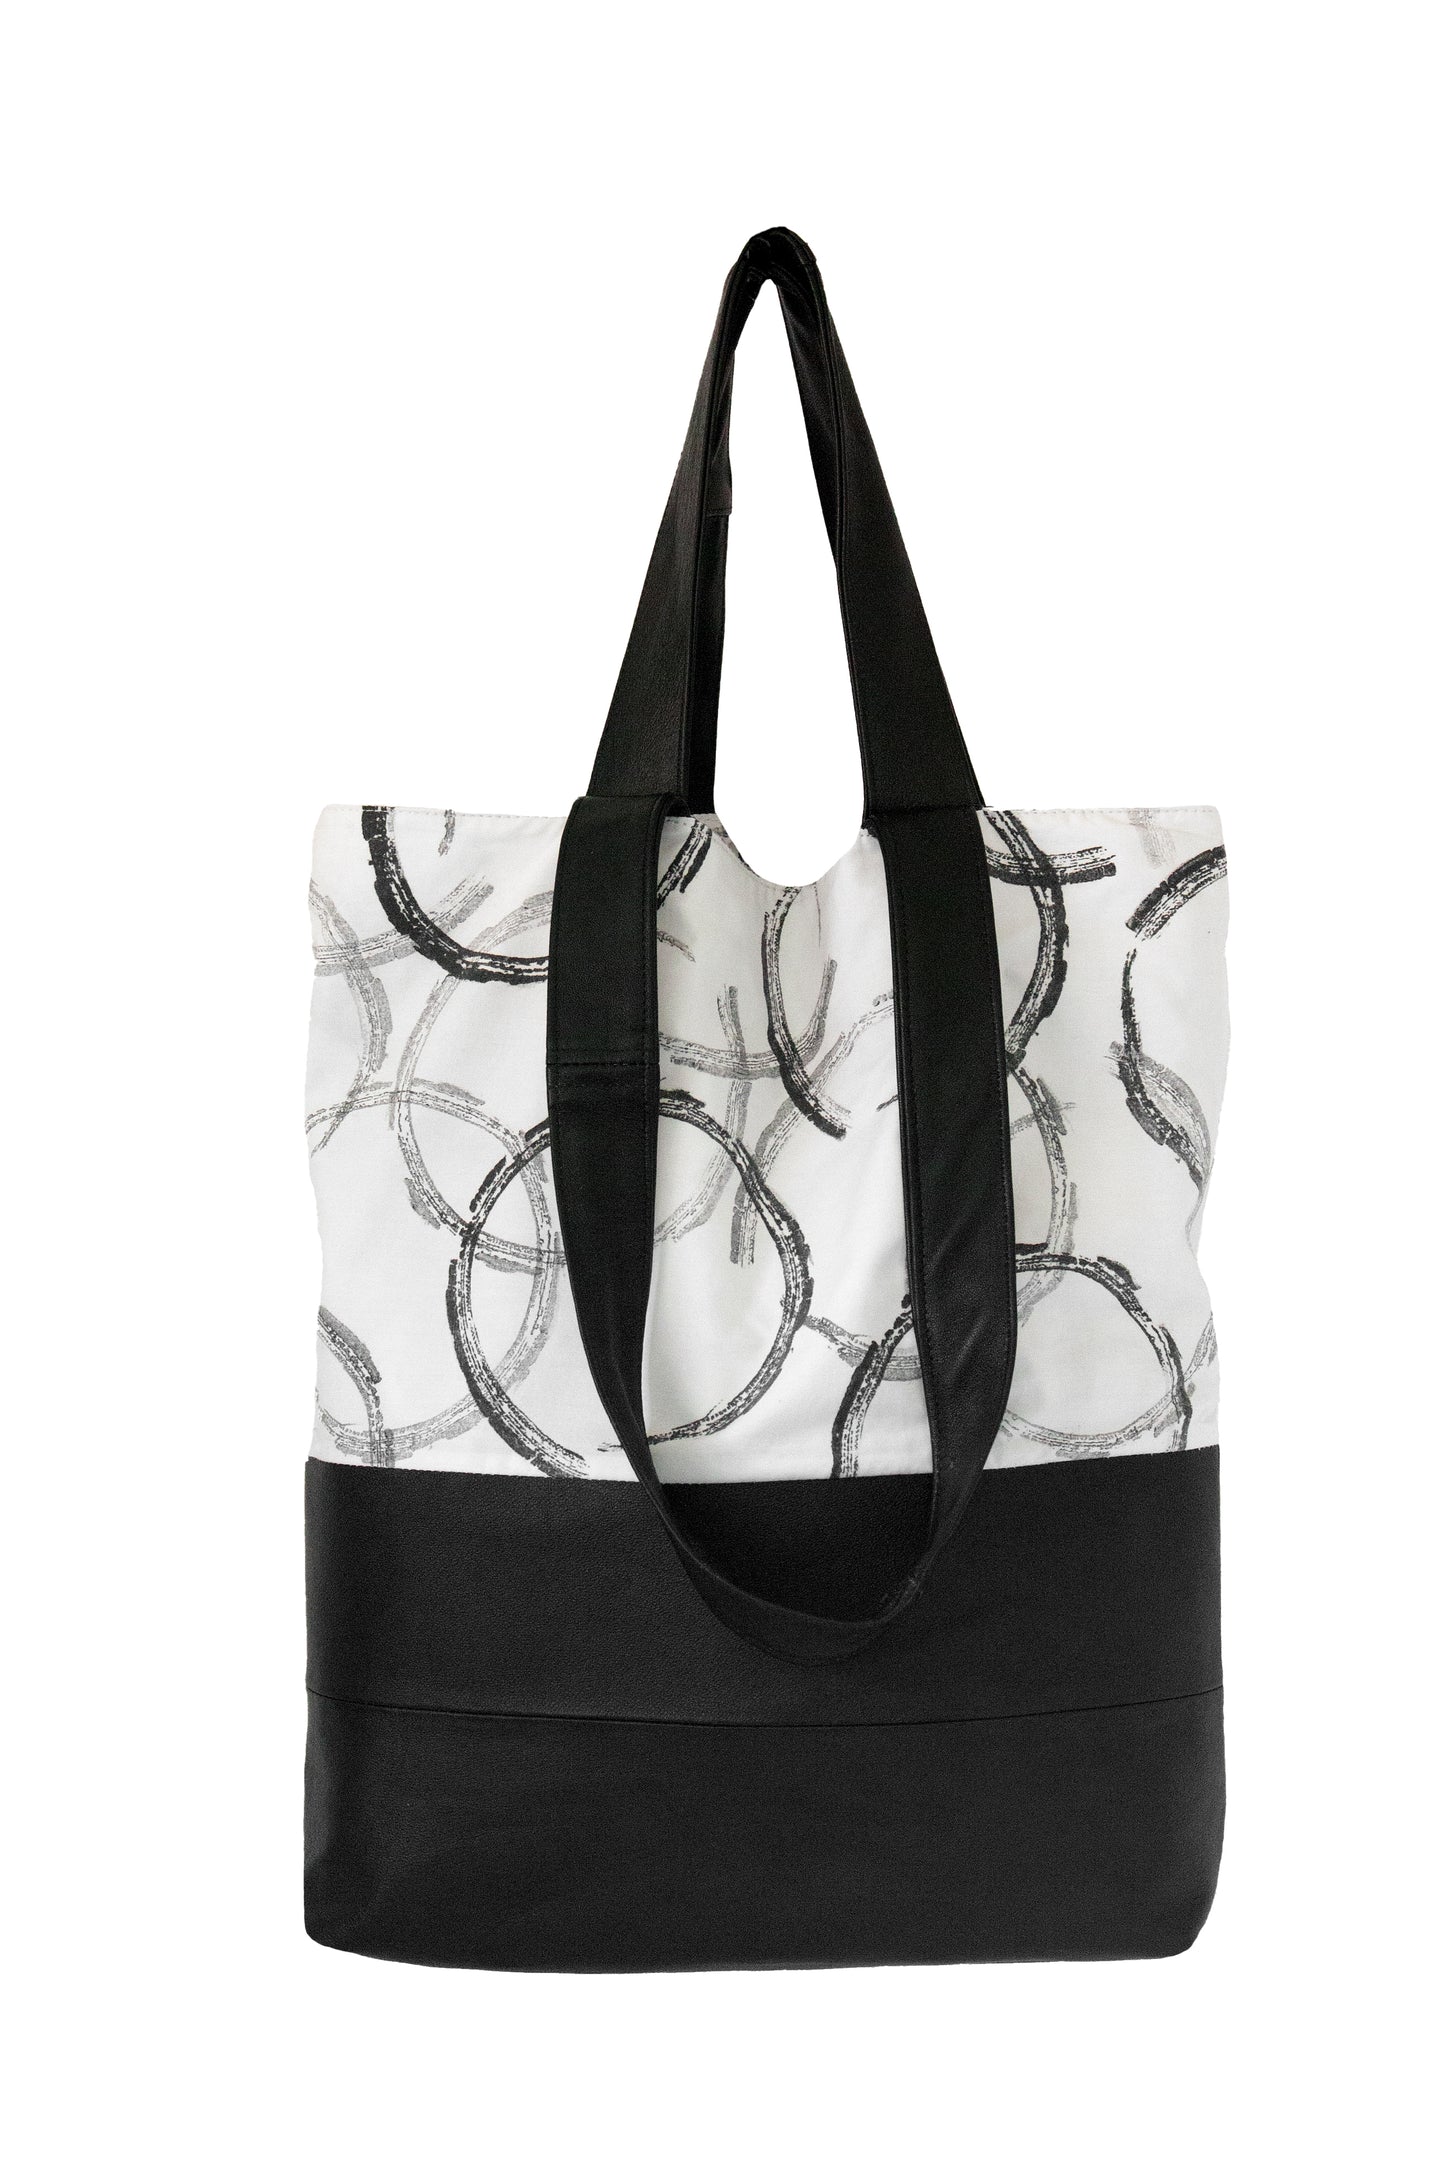 Reclaimed leather and cotton Tyre tote bag